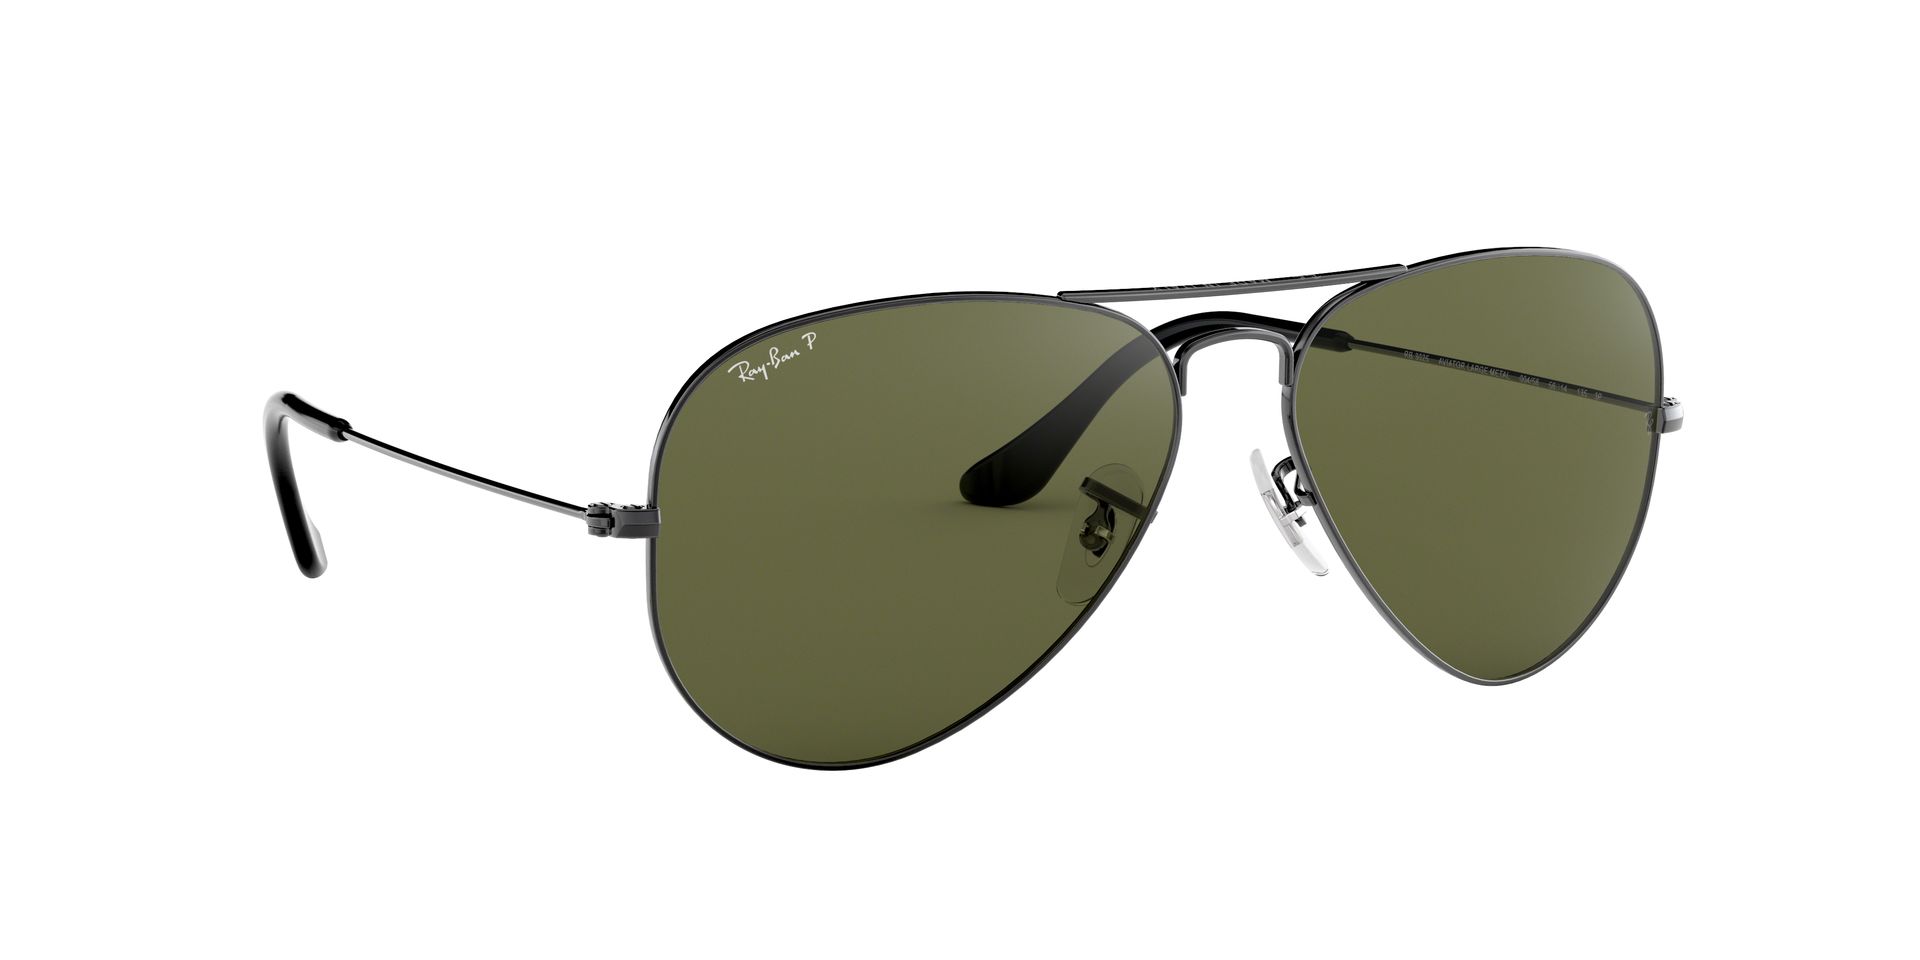 Brillenchic Onlineshop In Berlin Ray Ban Aviator Rb 3025 004 58 Polarized